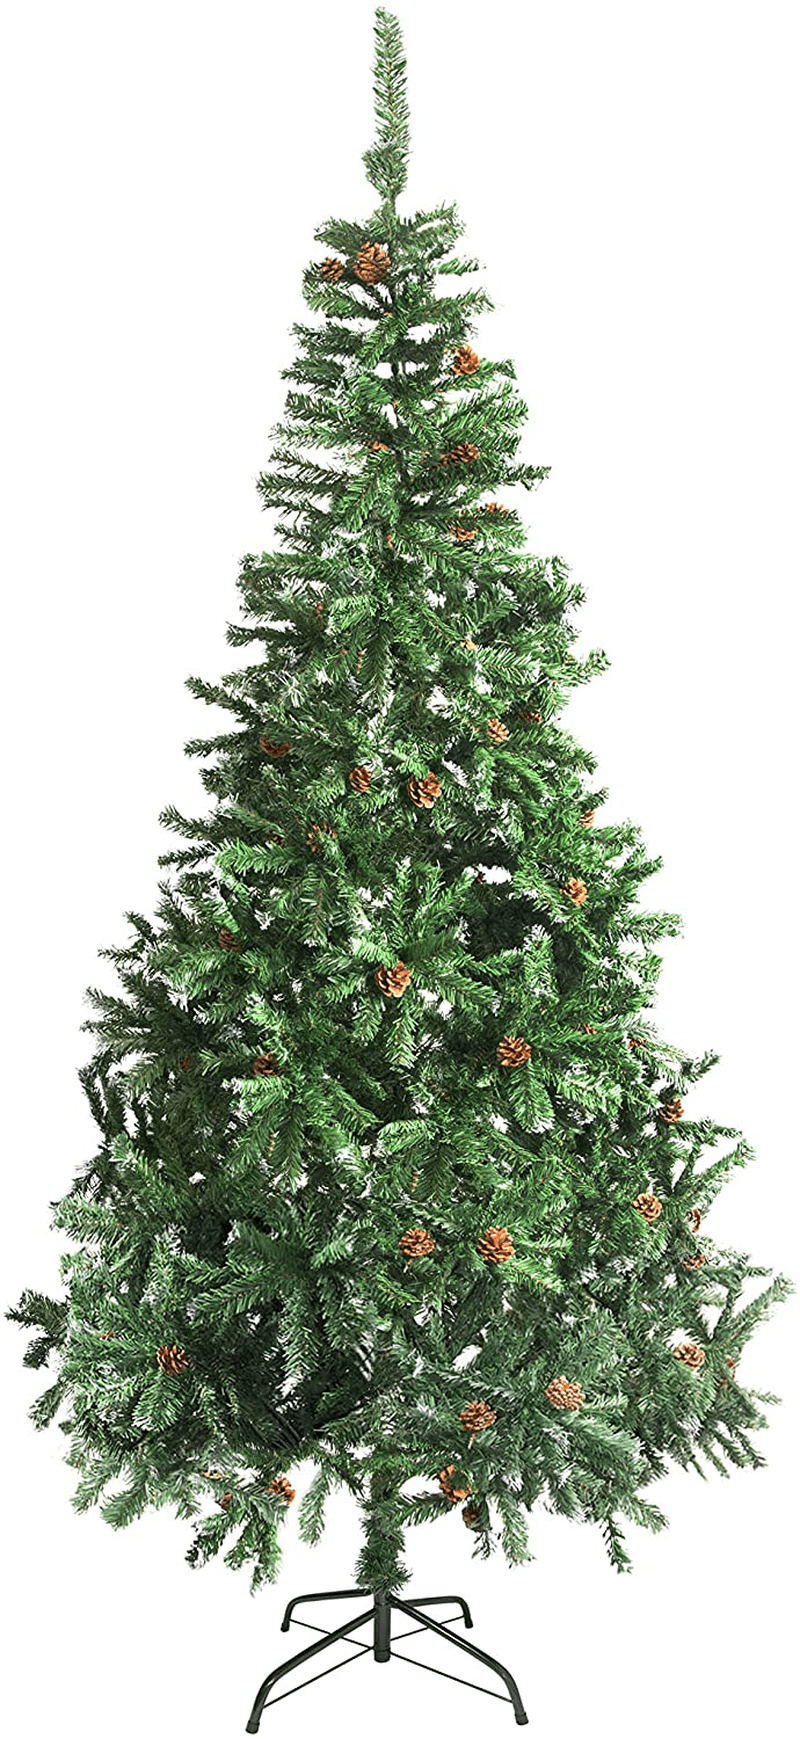 ALEKO CTPC106H17 Artificial Holiday Christmas Tree Premium Pine with Stand and Pine Cones 9 Foot Green